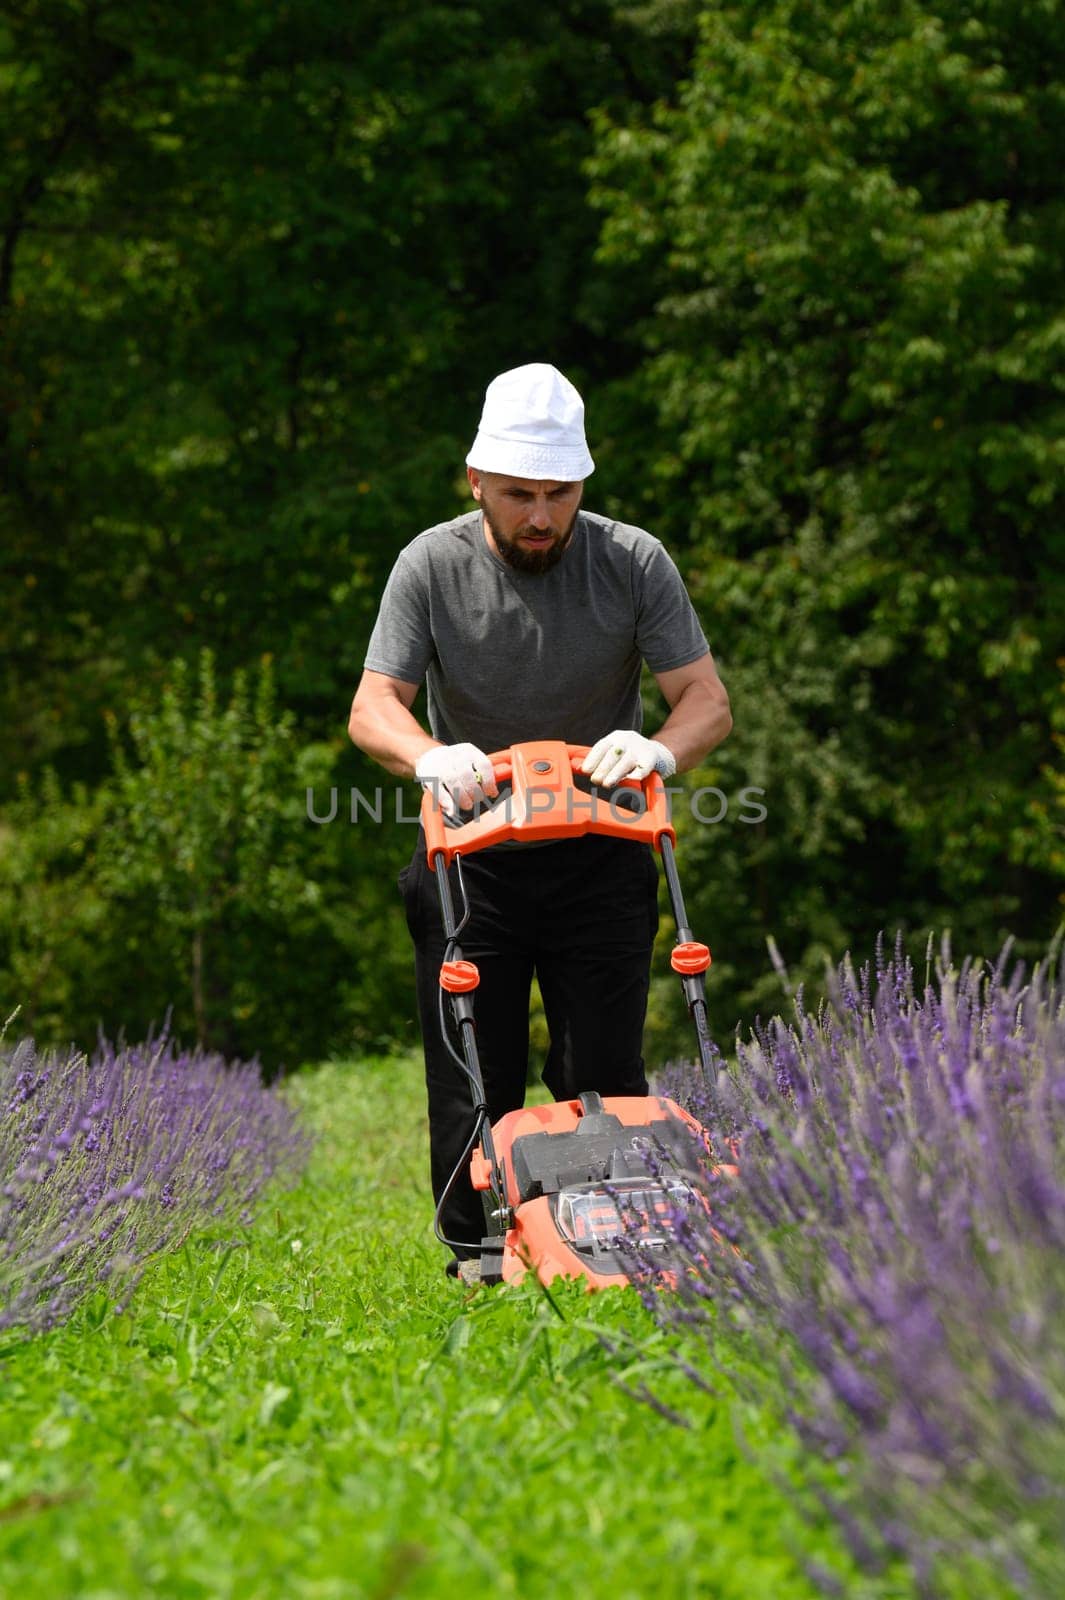 Mowing the grass in the lavender field with an electric lawnmower by Niko_Cingaryuk